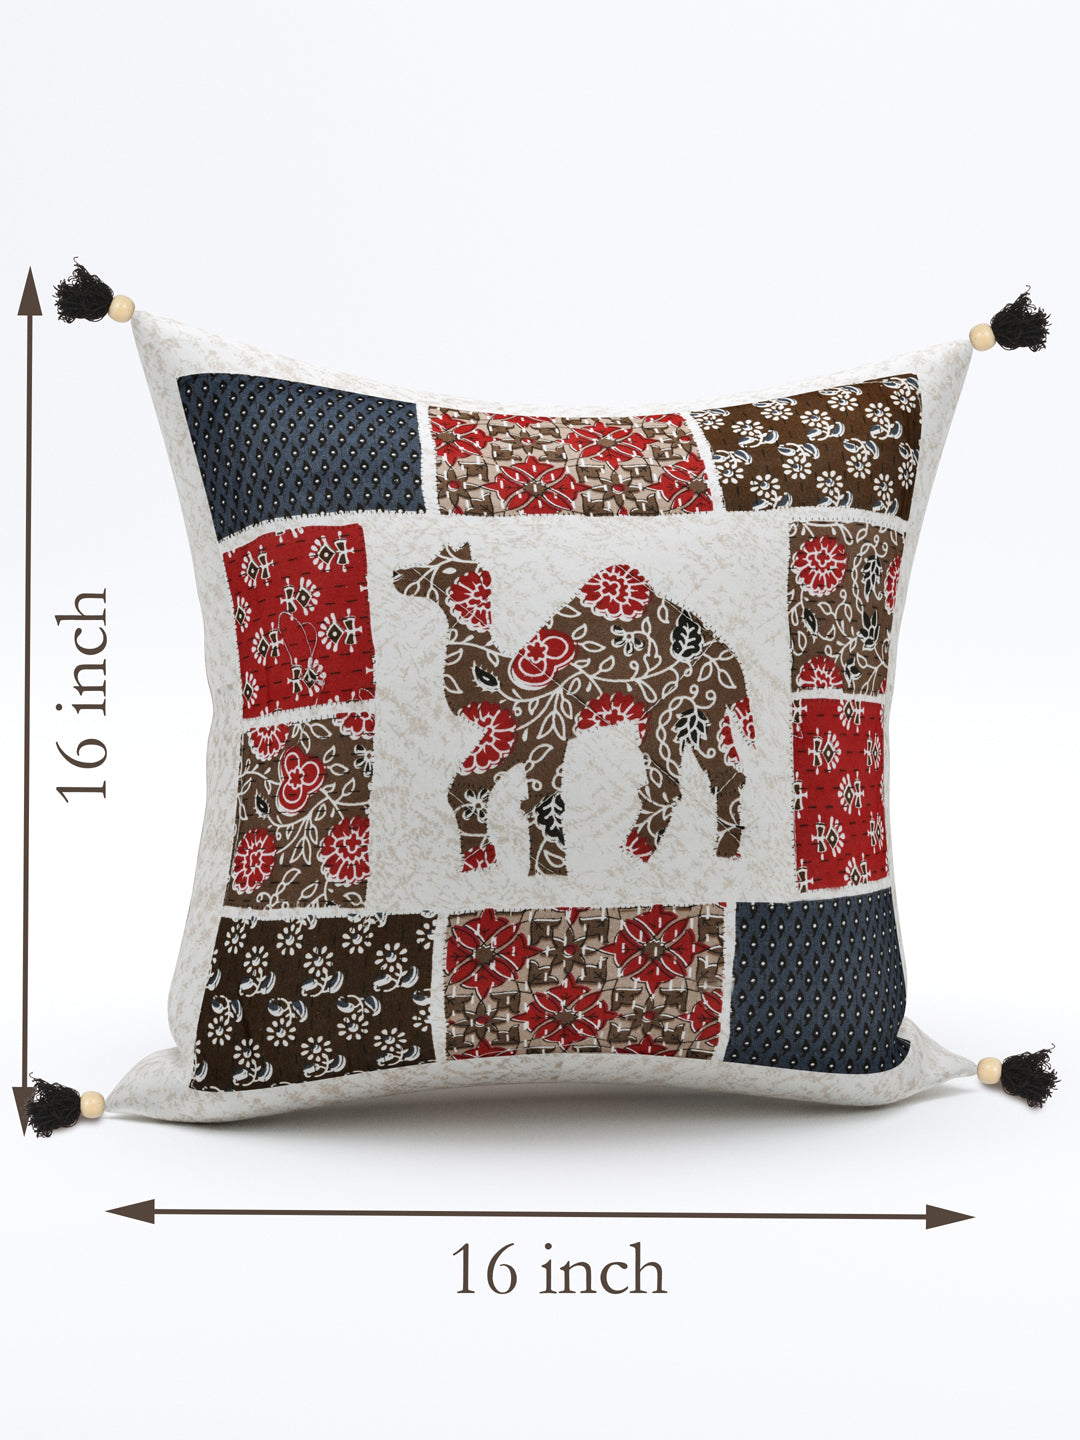 Living Roots Camel Patchwork Cotton Cushion Cover- Set of 5 (40-026-C)